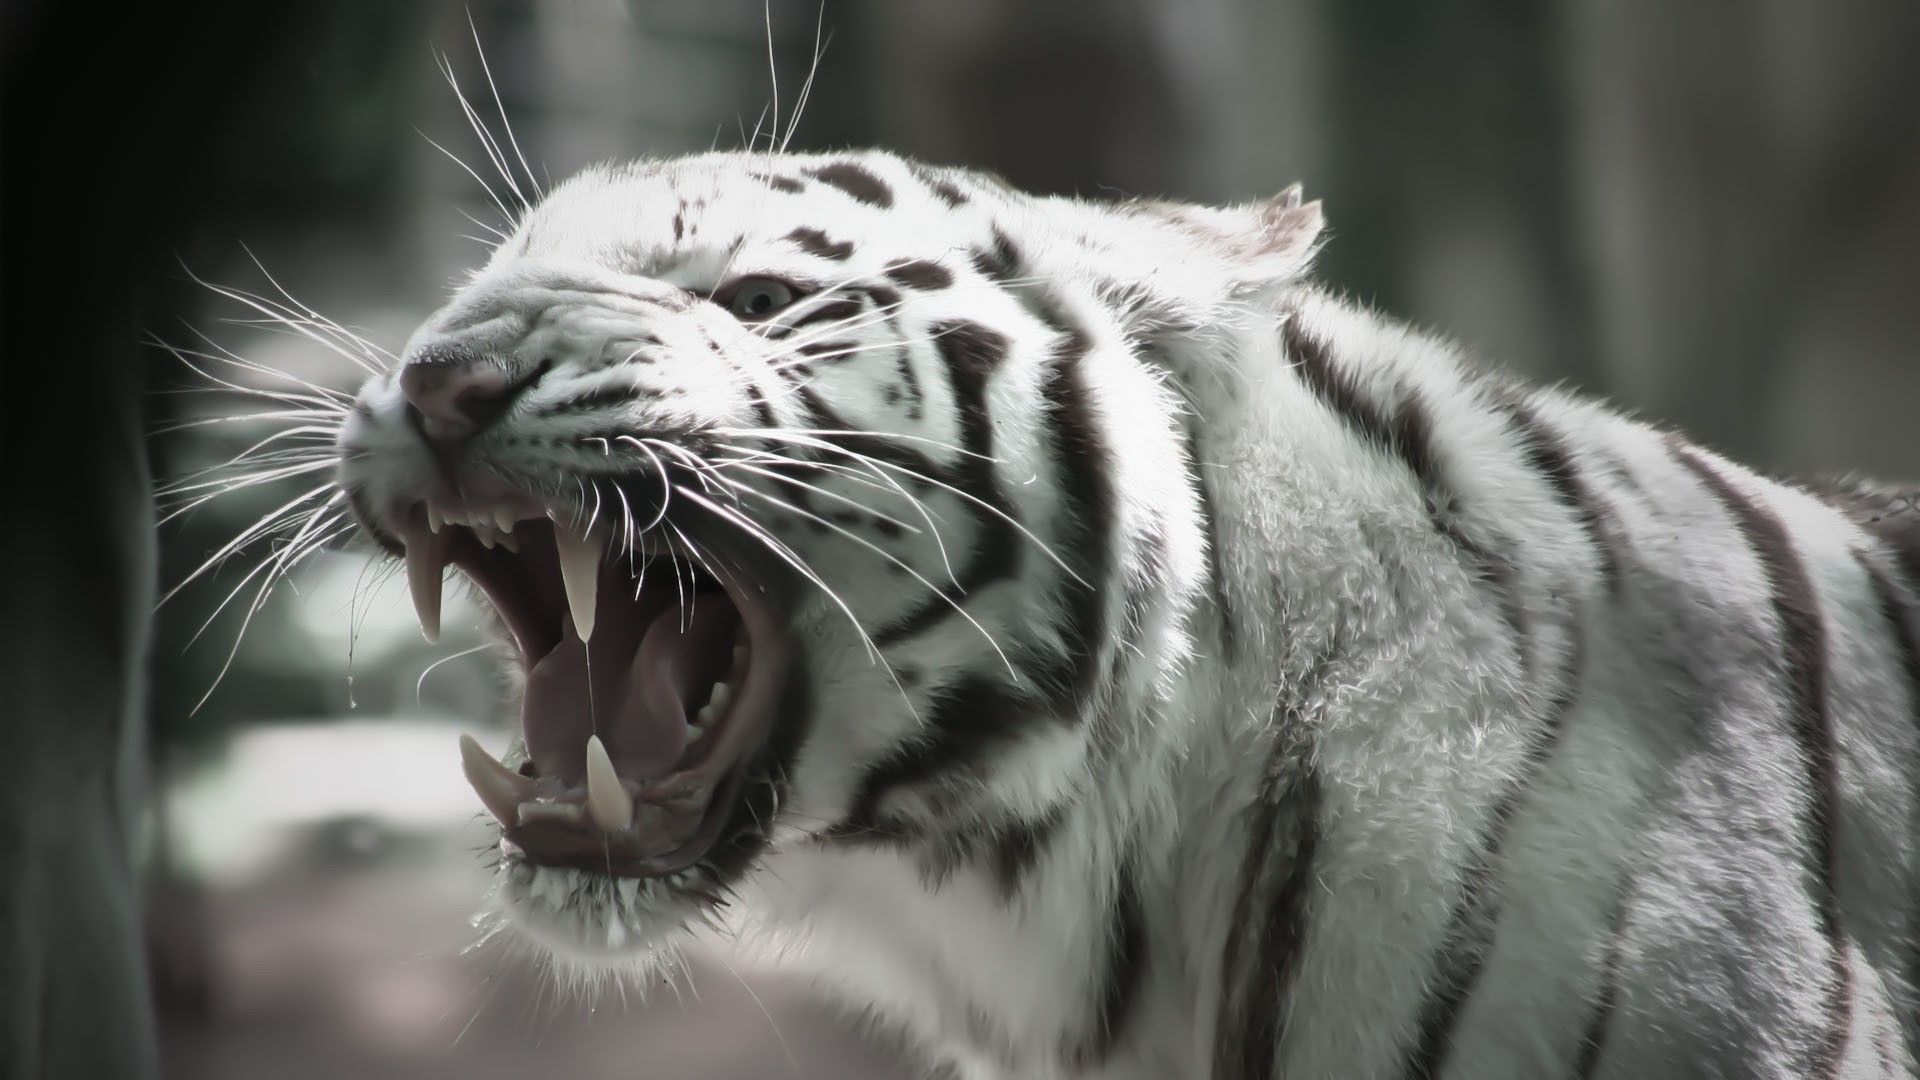 White tiger showing its teeth in the zoo - Tiger